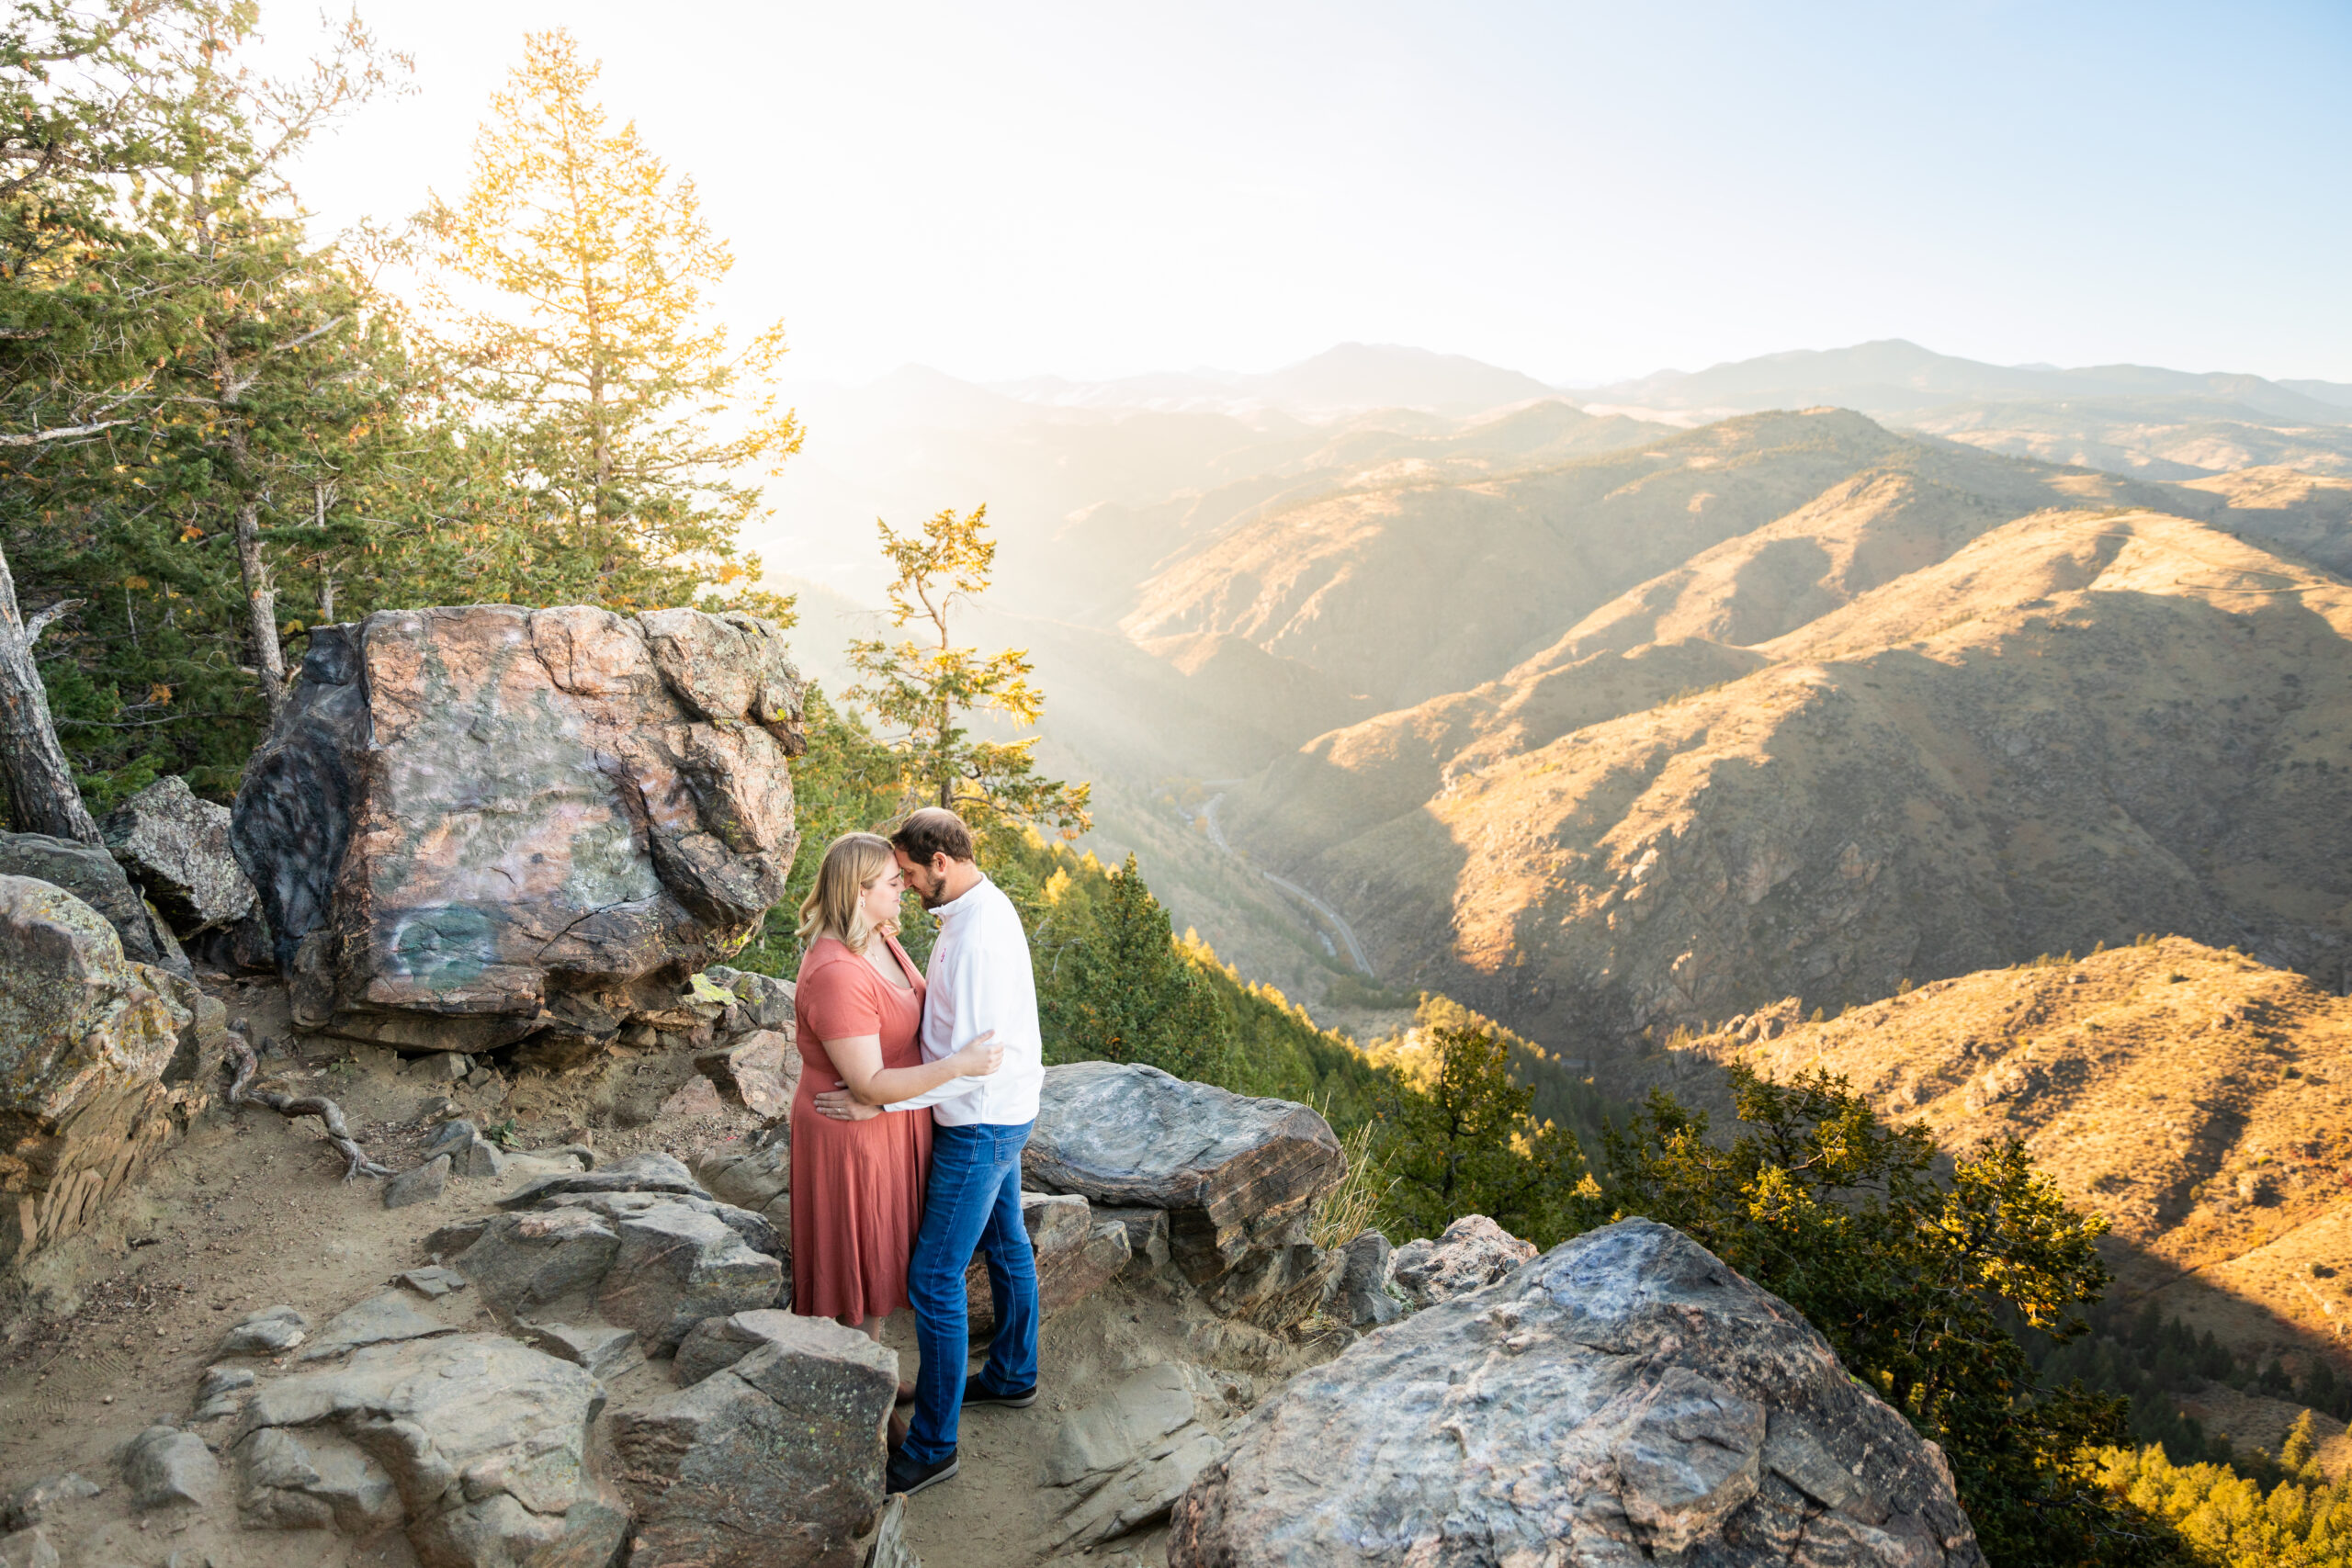 A man and woman stand on the edge of a cliff overlooking a mountain view. The woman is wearing a pink dress and the man is wearing a white sweater with blue jeans.